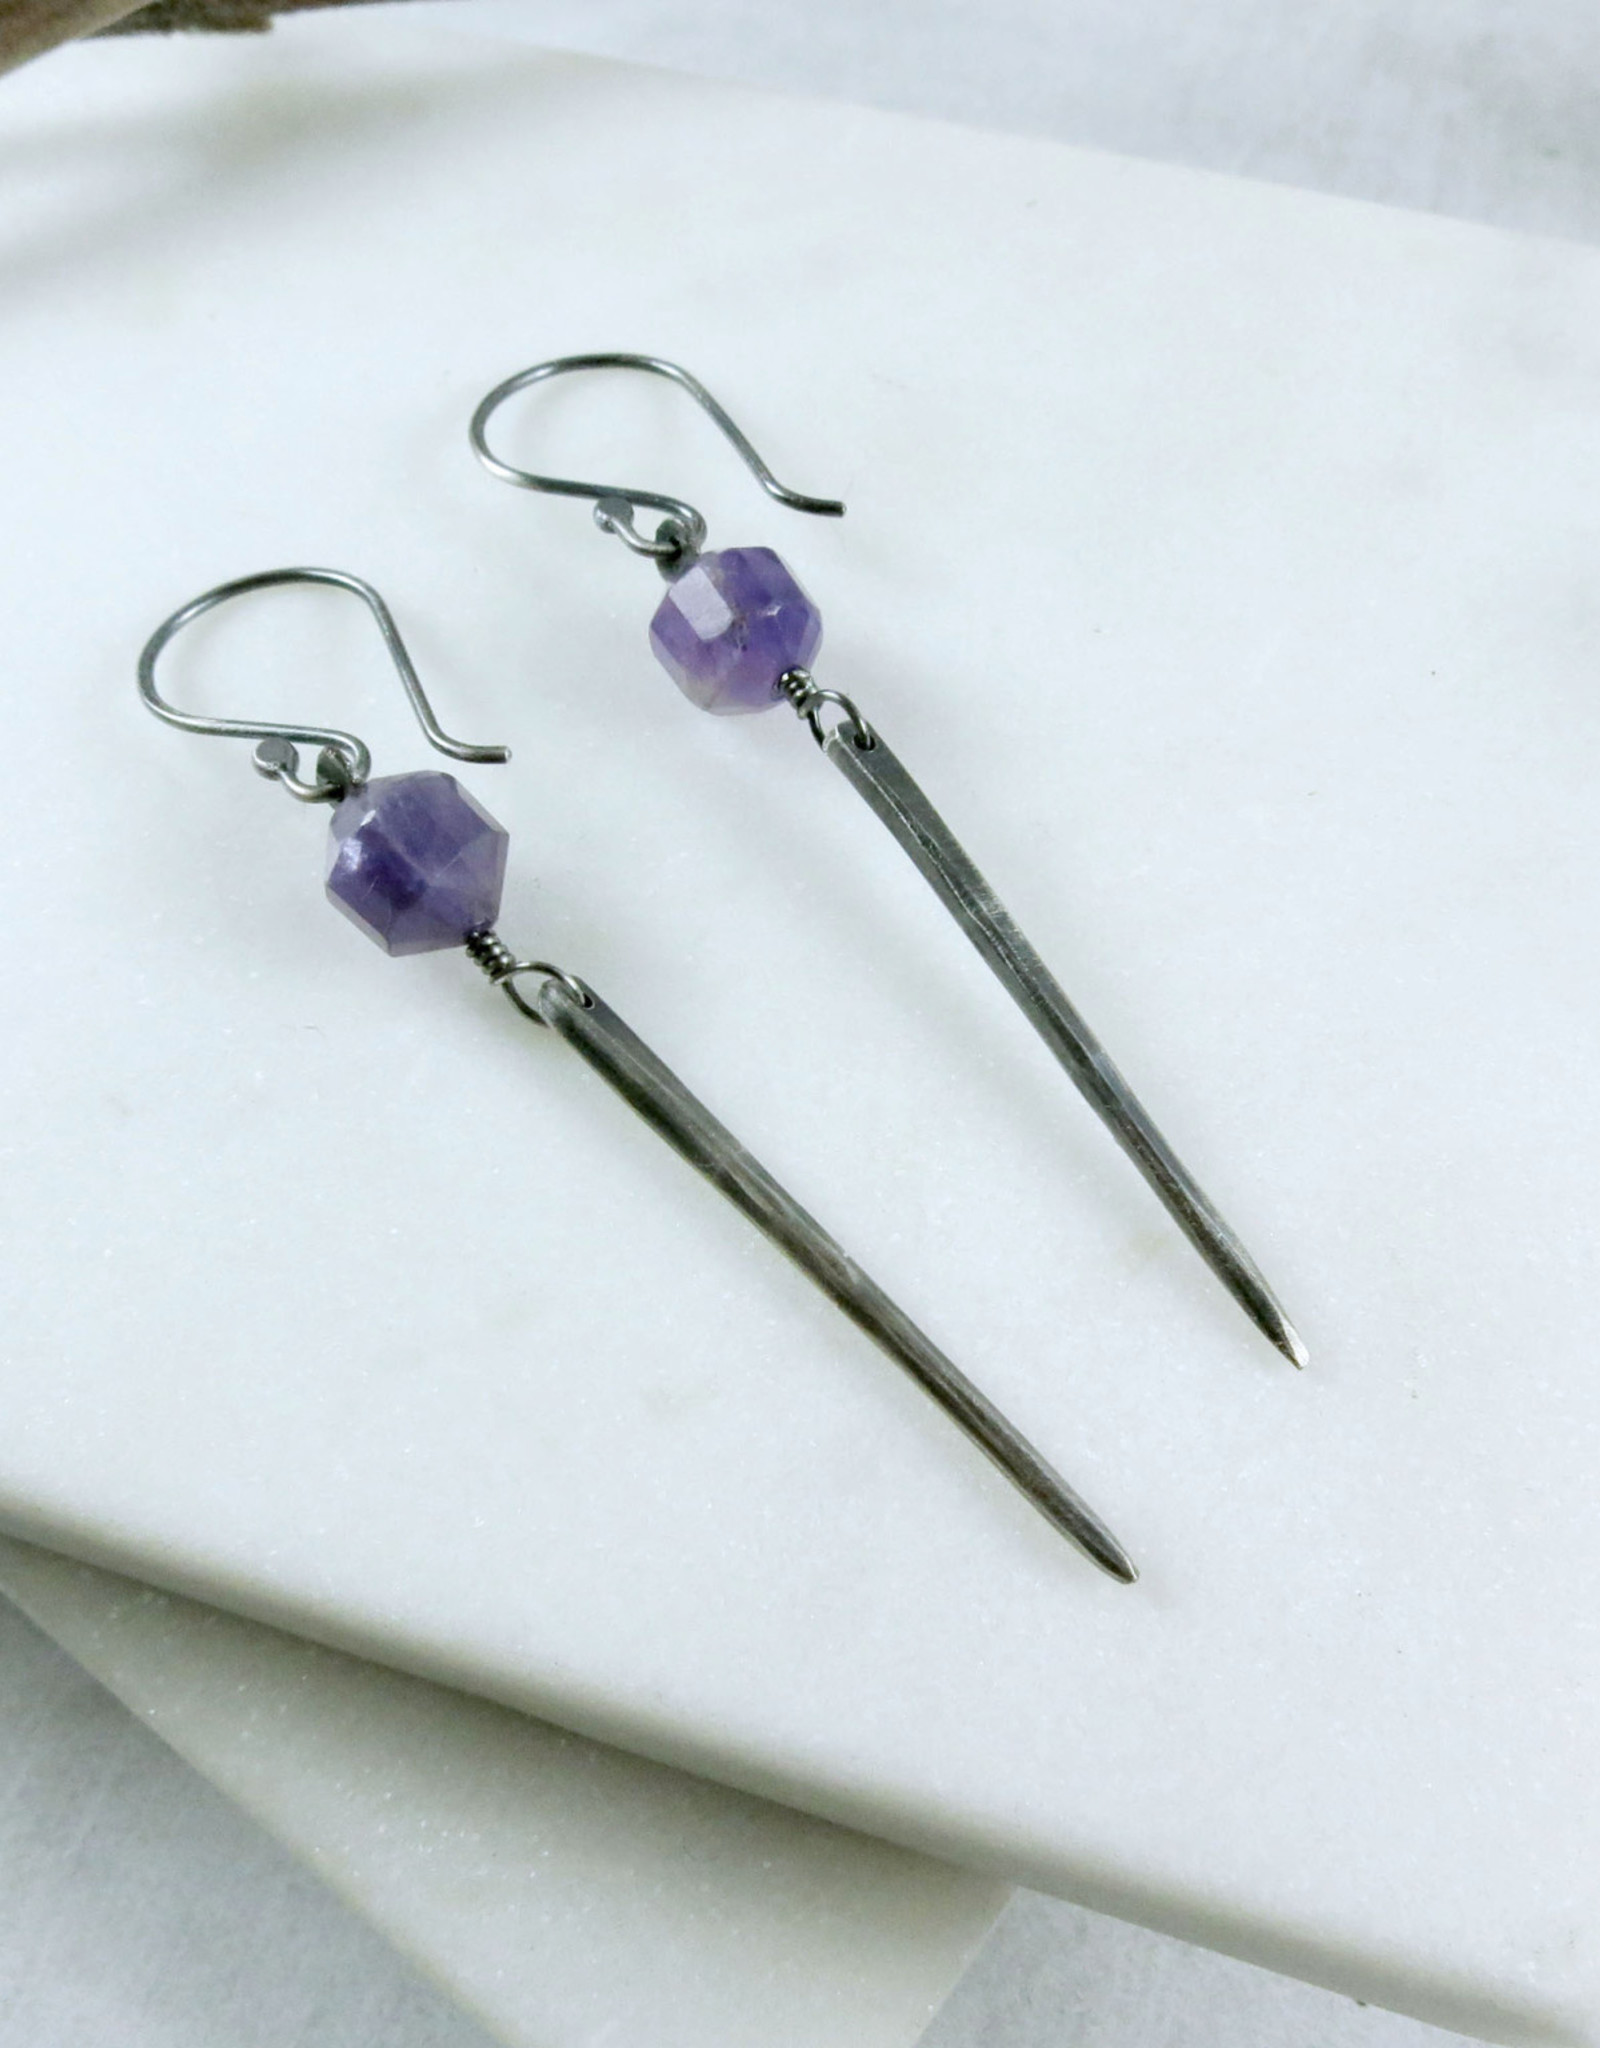 Catherine Chandler Courage Earrings in Amethyst and Oxidized Sterling Silver - CCJ